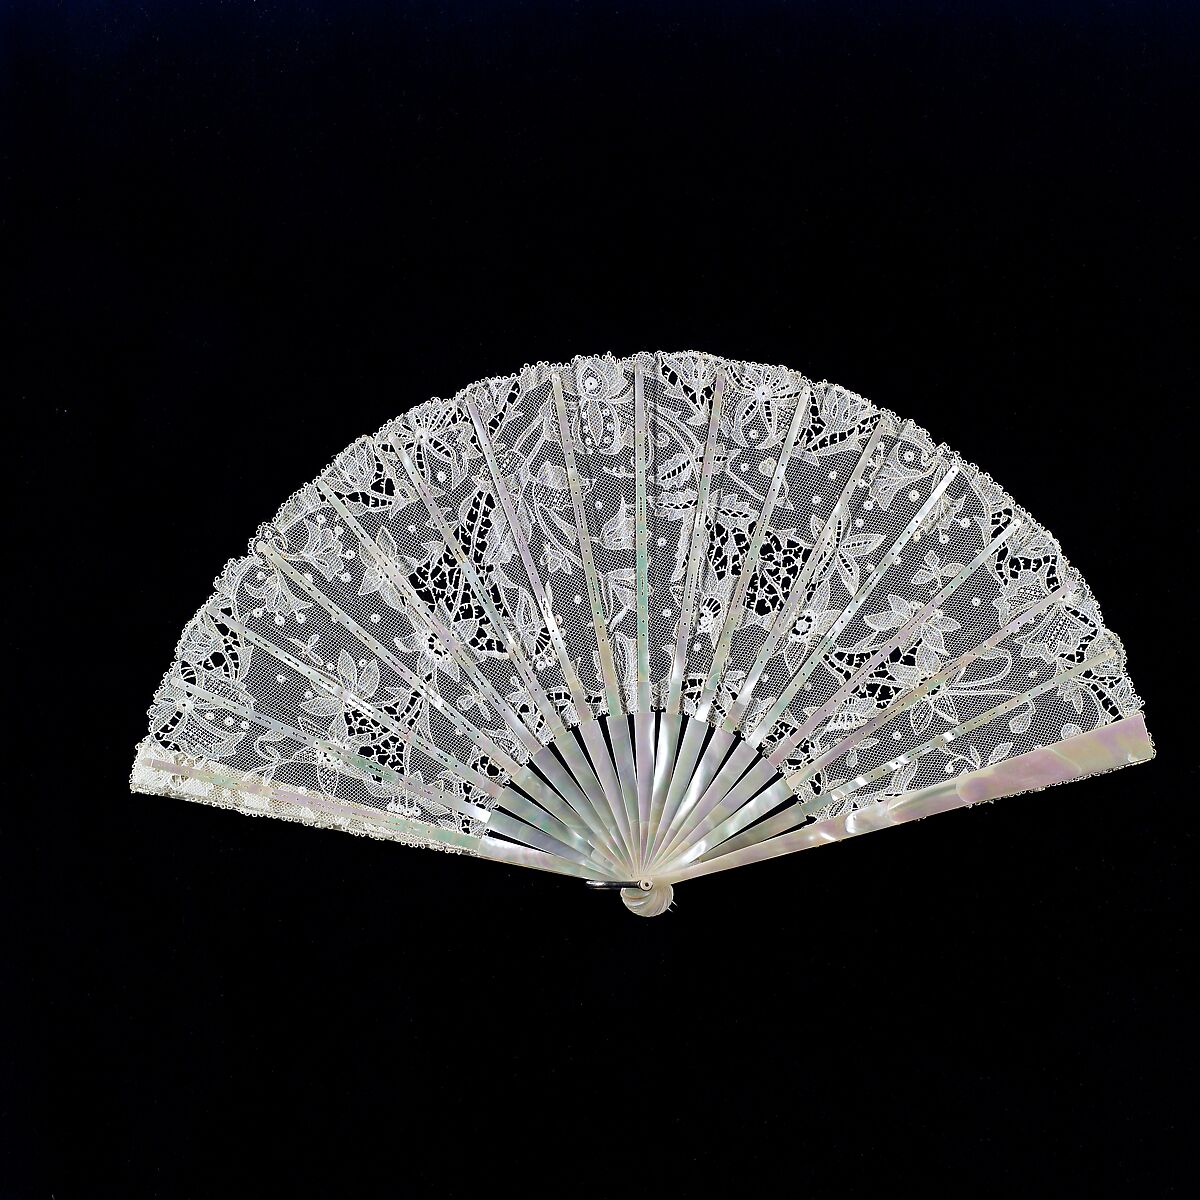 Fan, mother-of-pearl, cotton, American or European 